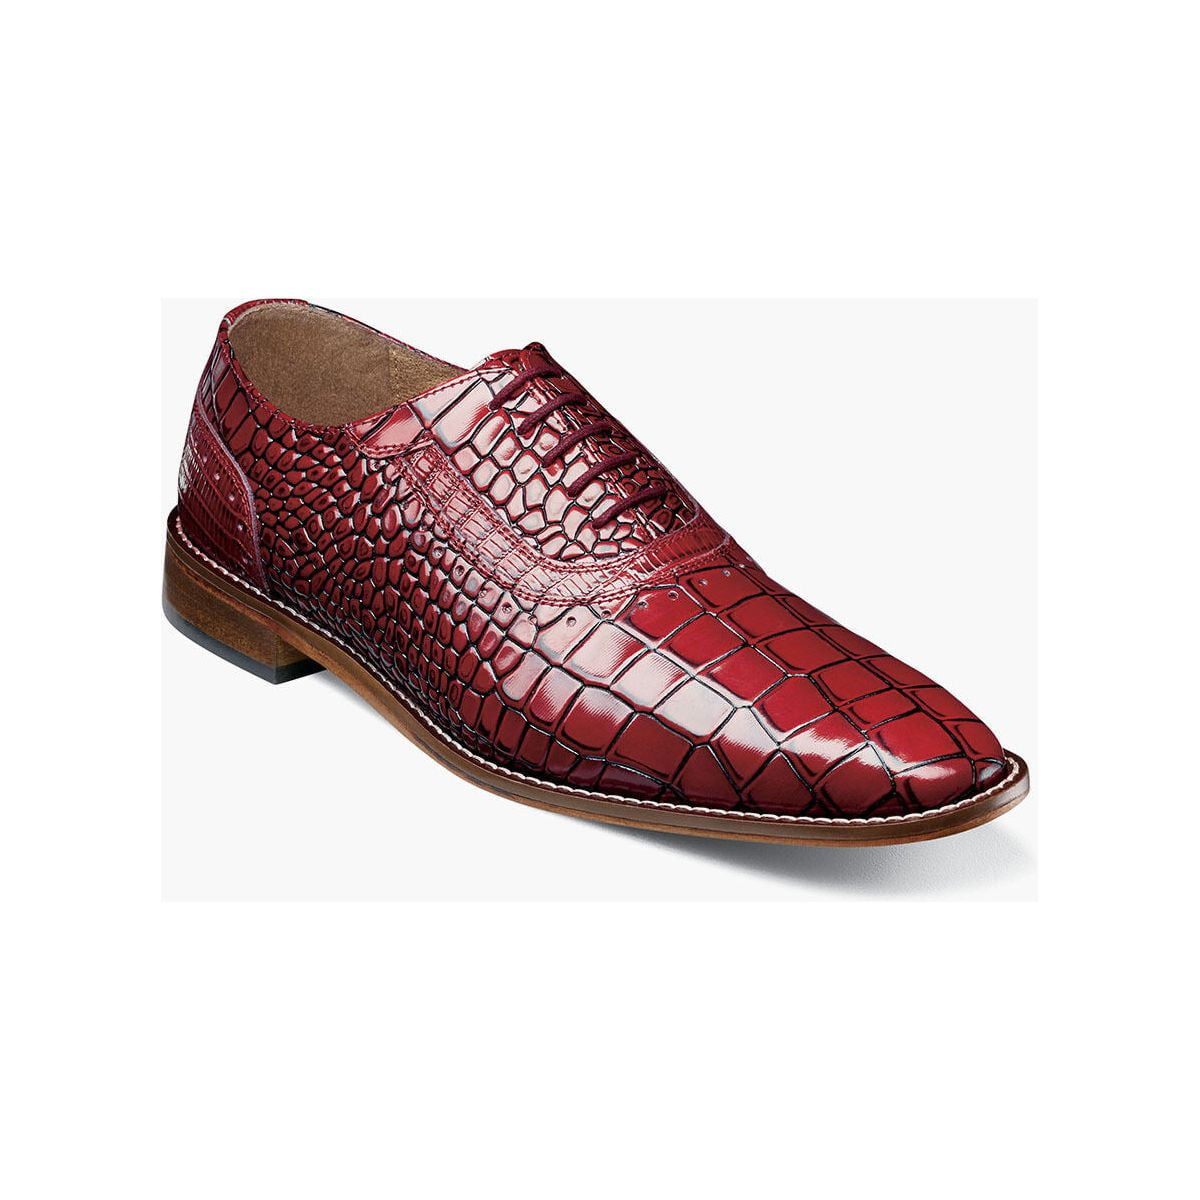 Stacy Adams Riccardi Plain Toe Oxford Shoes Animal Print Red 25575-600 ...